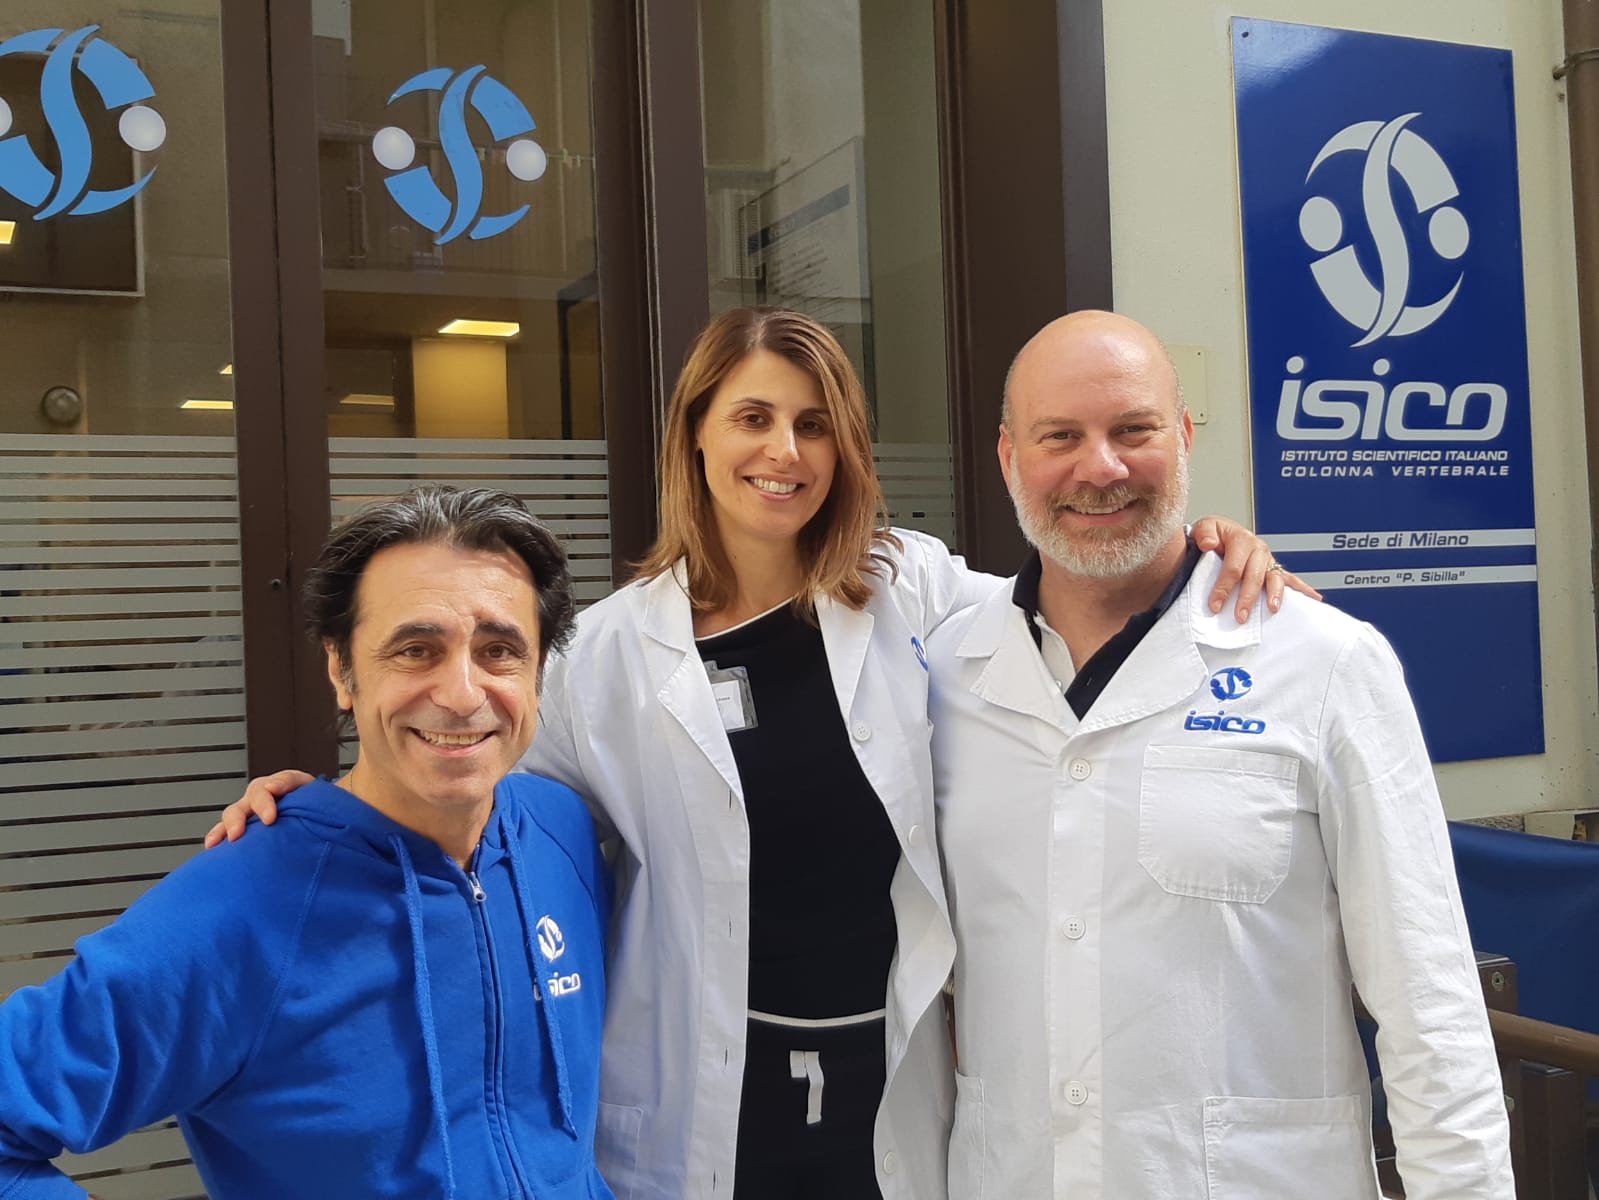 World Master: Rosemary Marchese’s stay with Isico